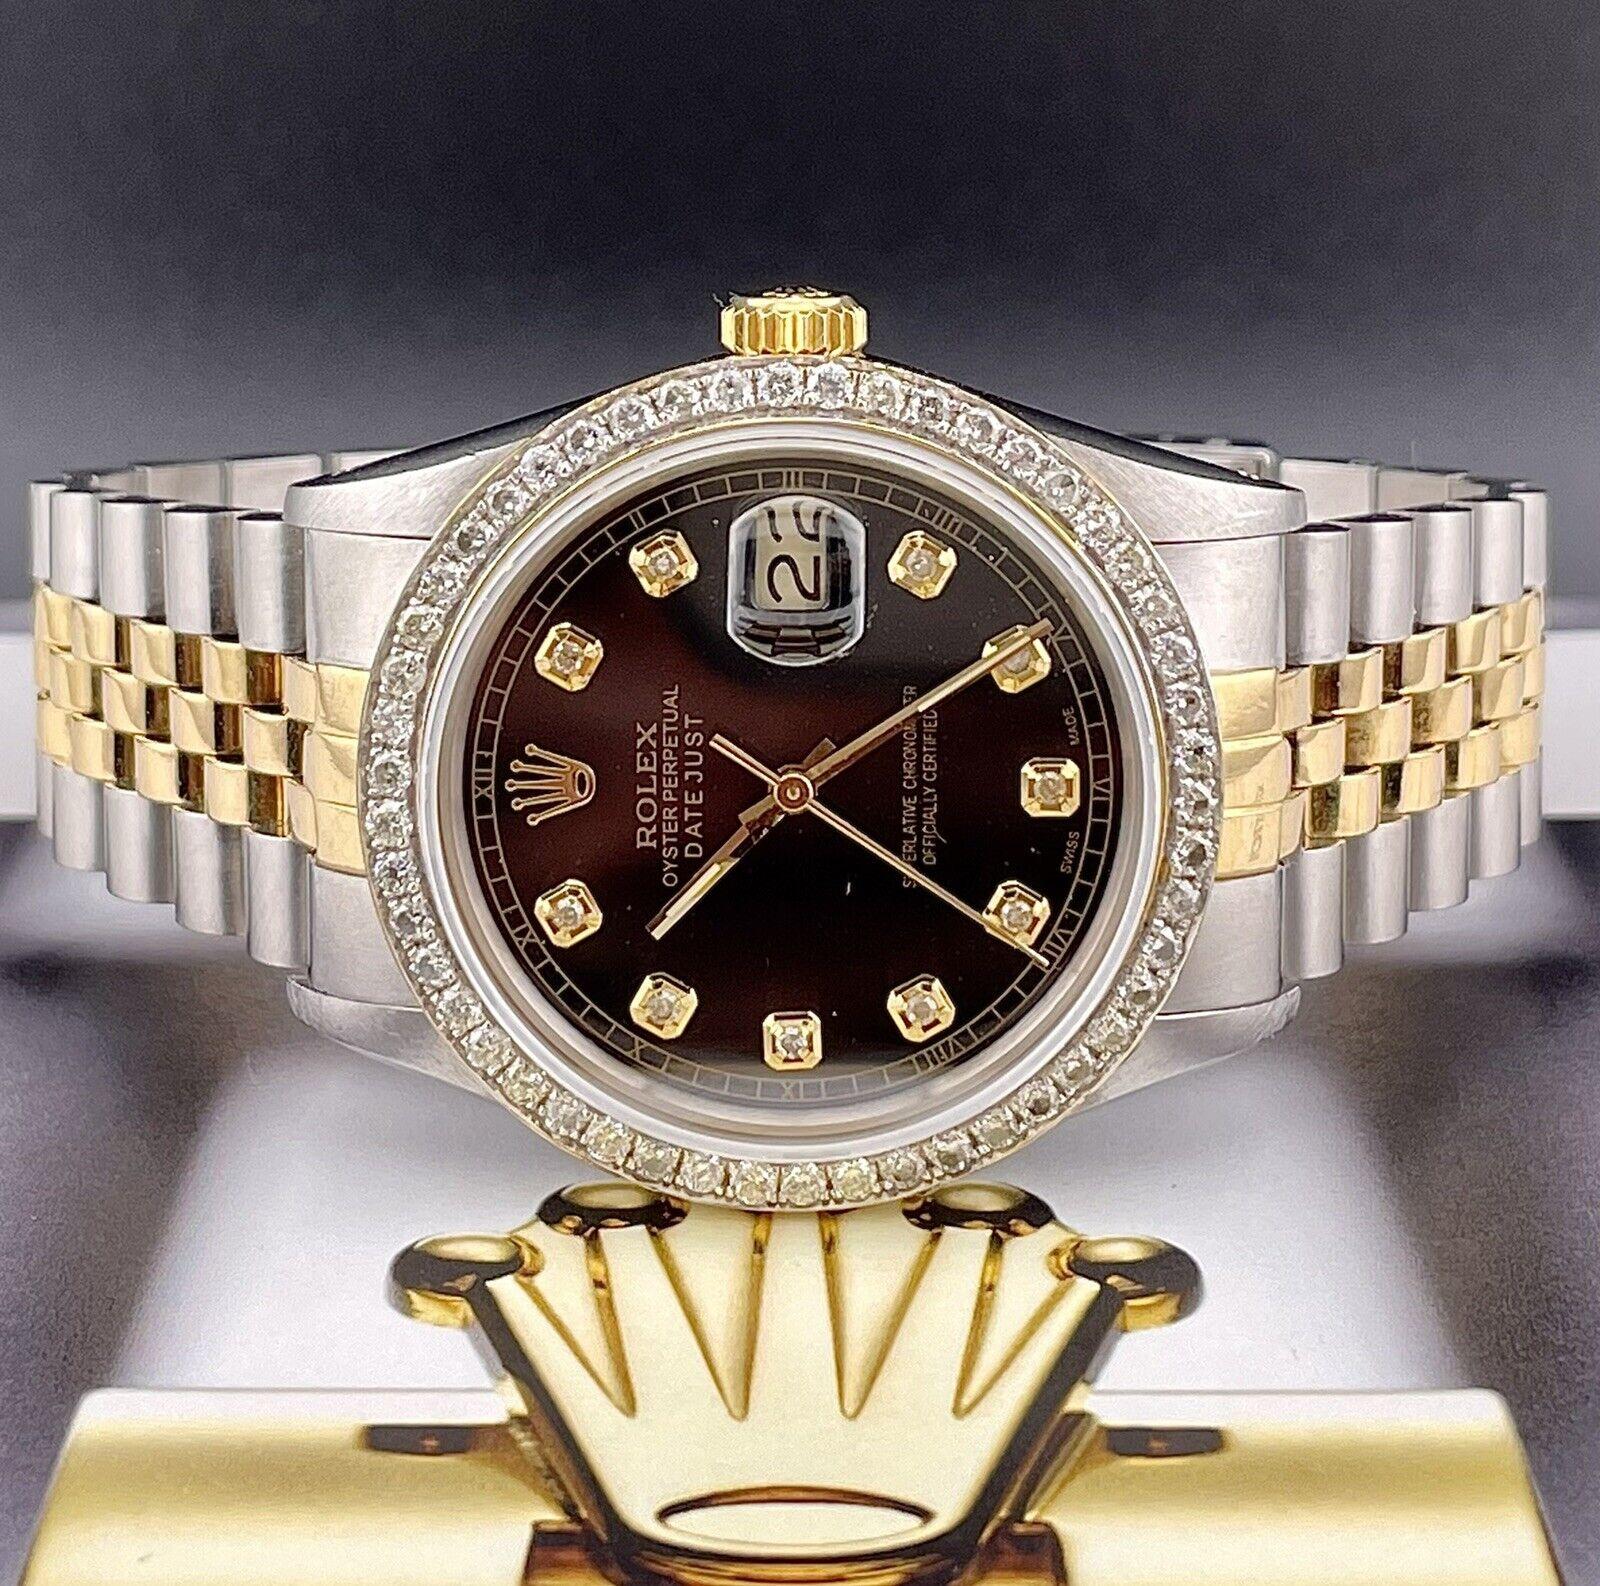 This is a Rolex Datejust 36mm with jubilee band. This watch is 2Tone, which means it's made up of both 18k Yellow Gold and Stainless Steel. We have also beautifully set 1.75ct worth of SI Diamonds on the bezel and dial. The dial is a custom, clean